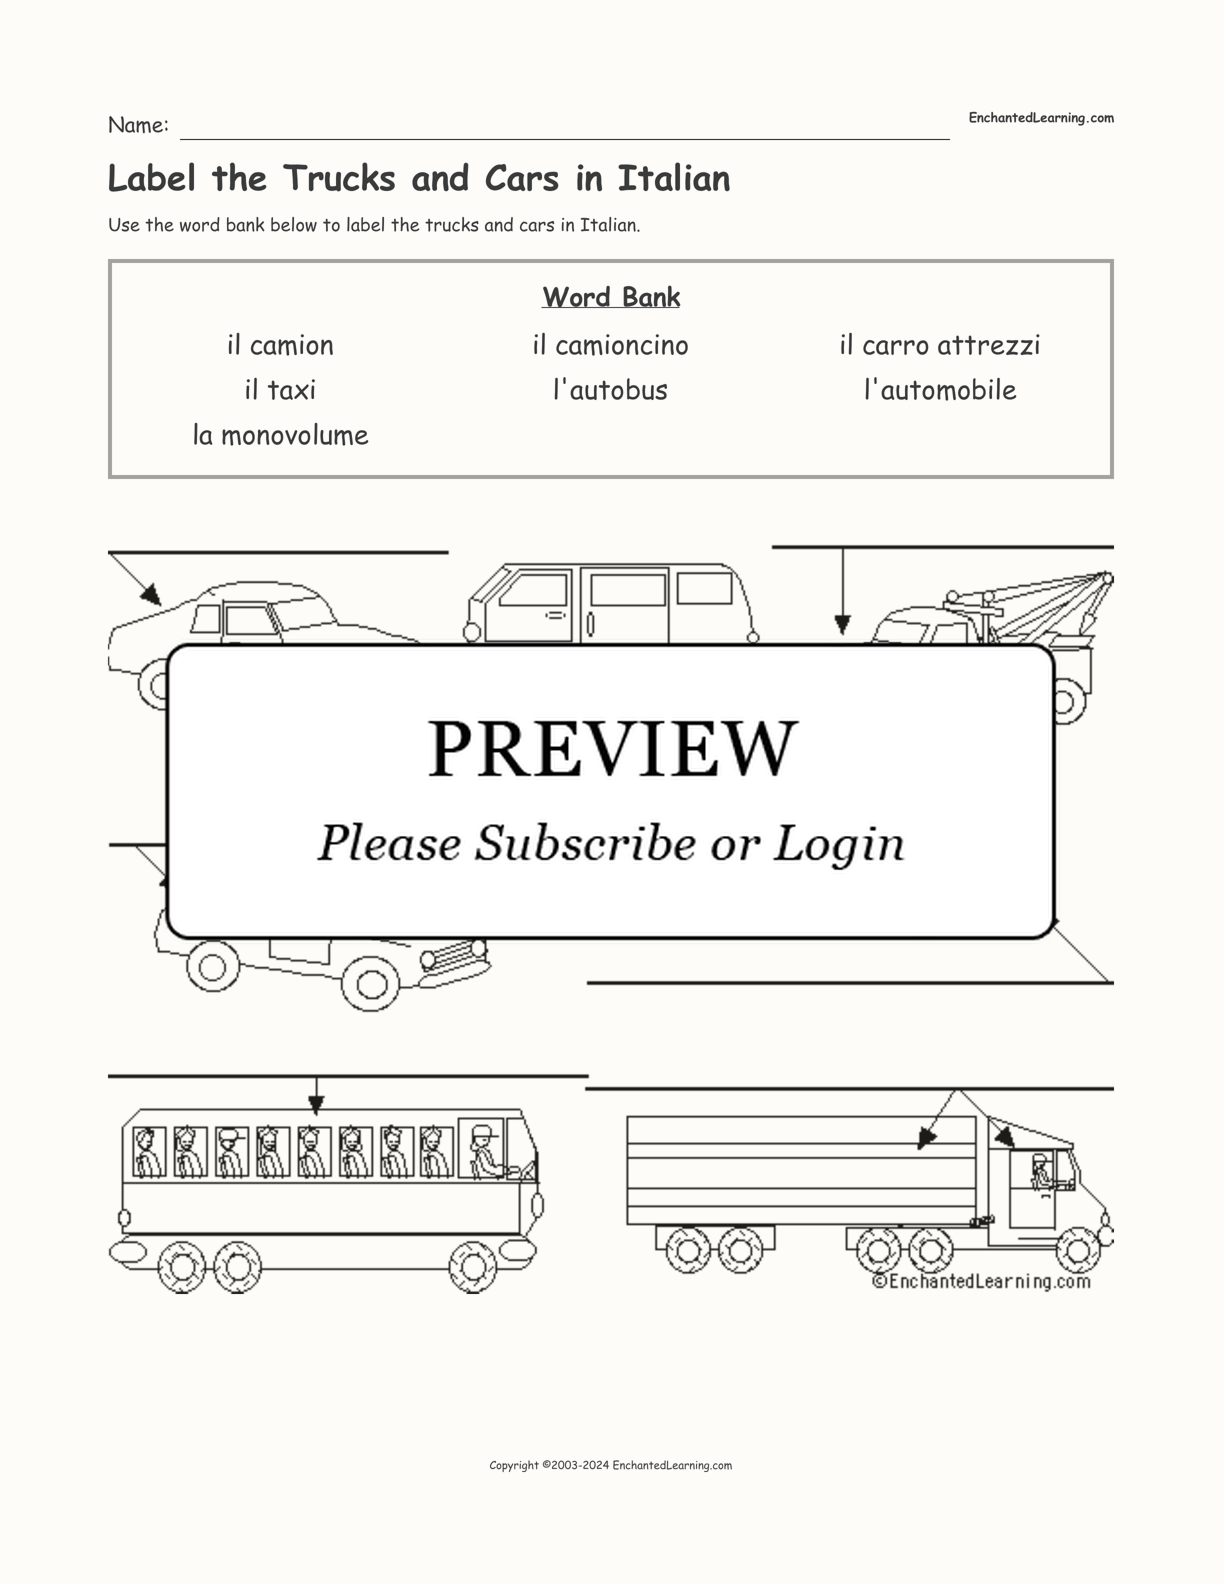 Label the Trucks and Cars in Italian interactive worksheet page 1